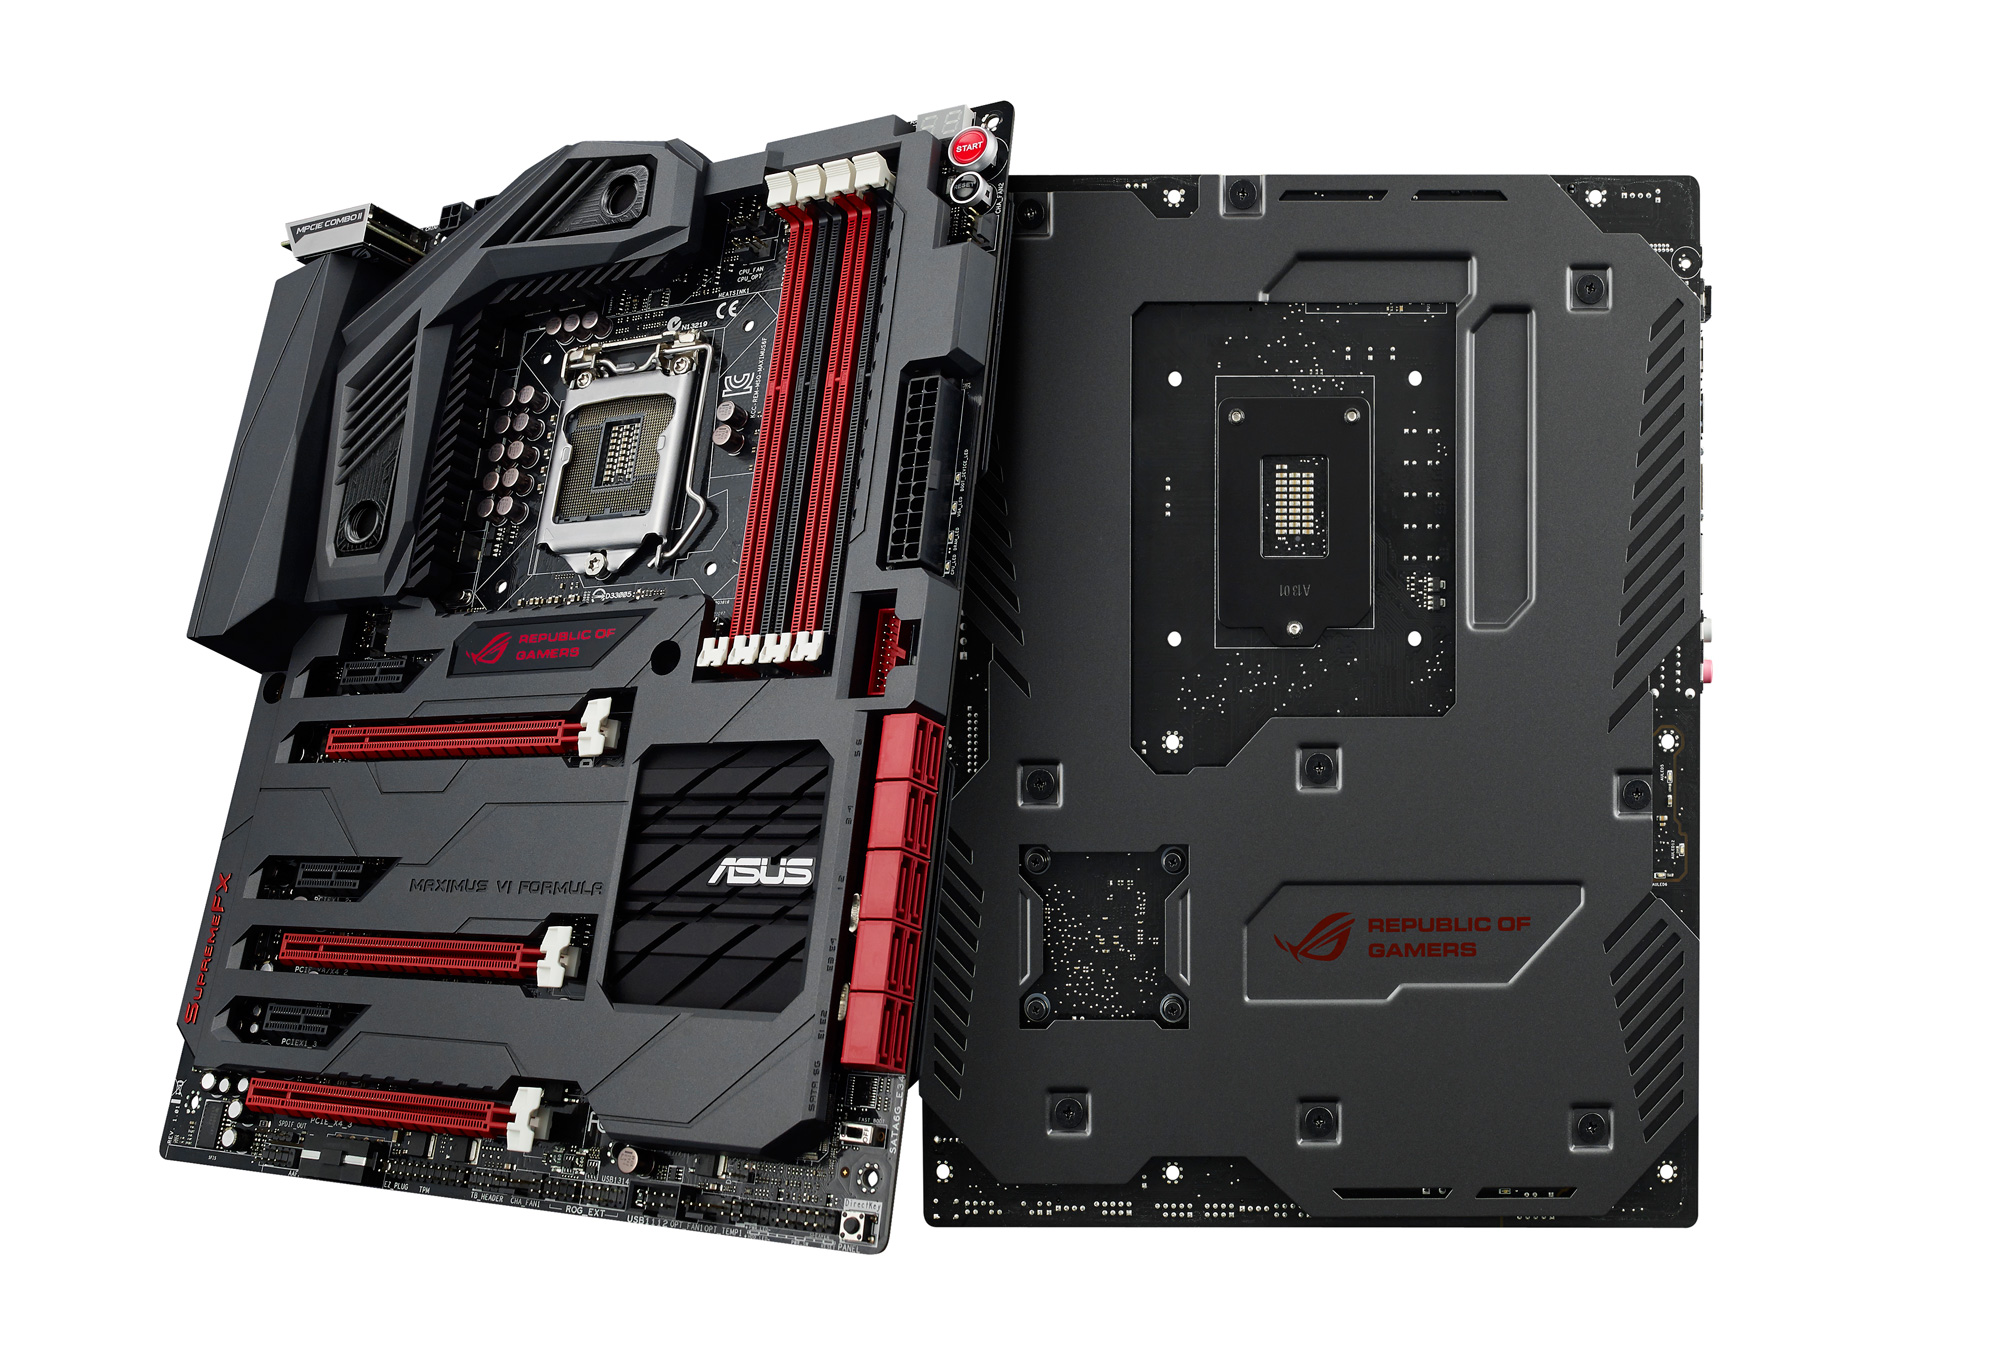 Media asset in full size related to 3dfxzone.it news item entitled as follows: ASUS lancia la gaming motherboard ROG Maximus VI Formula | Image Name: news19897_ASUS-ROG-Maximus-VI-Formula_4.jpg